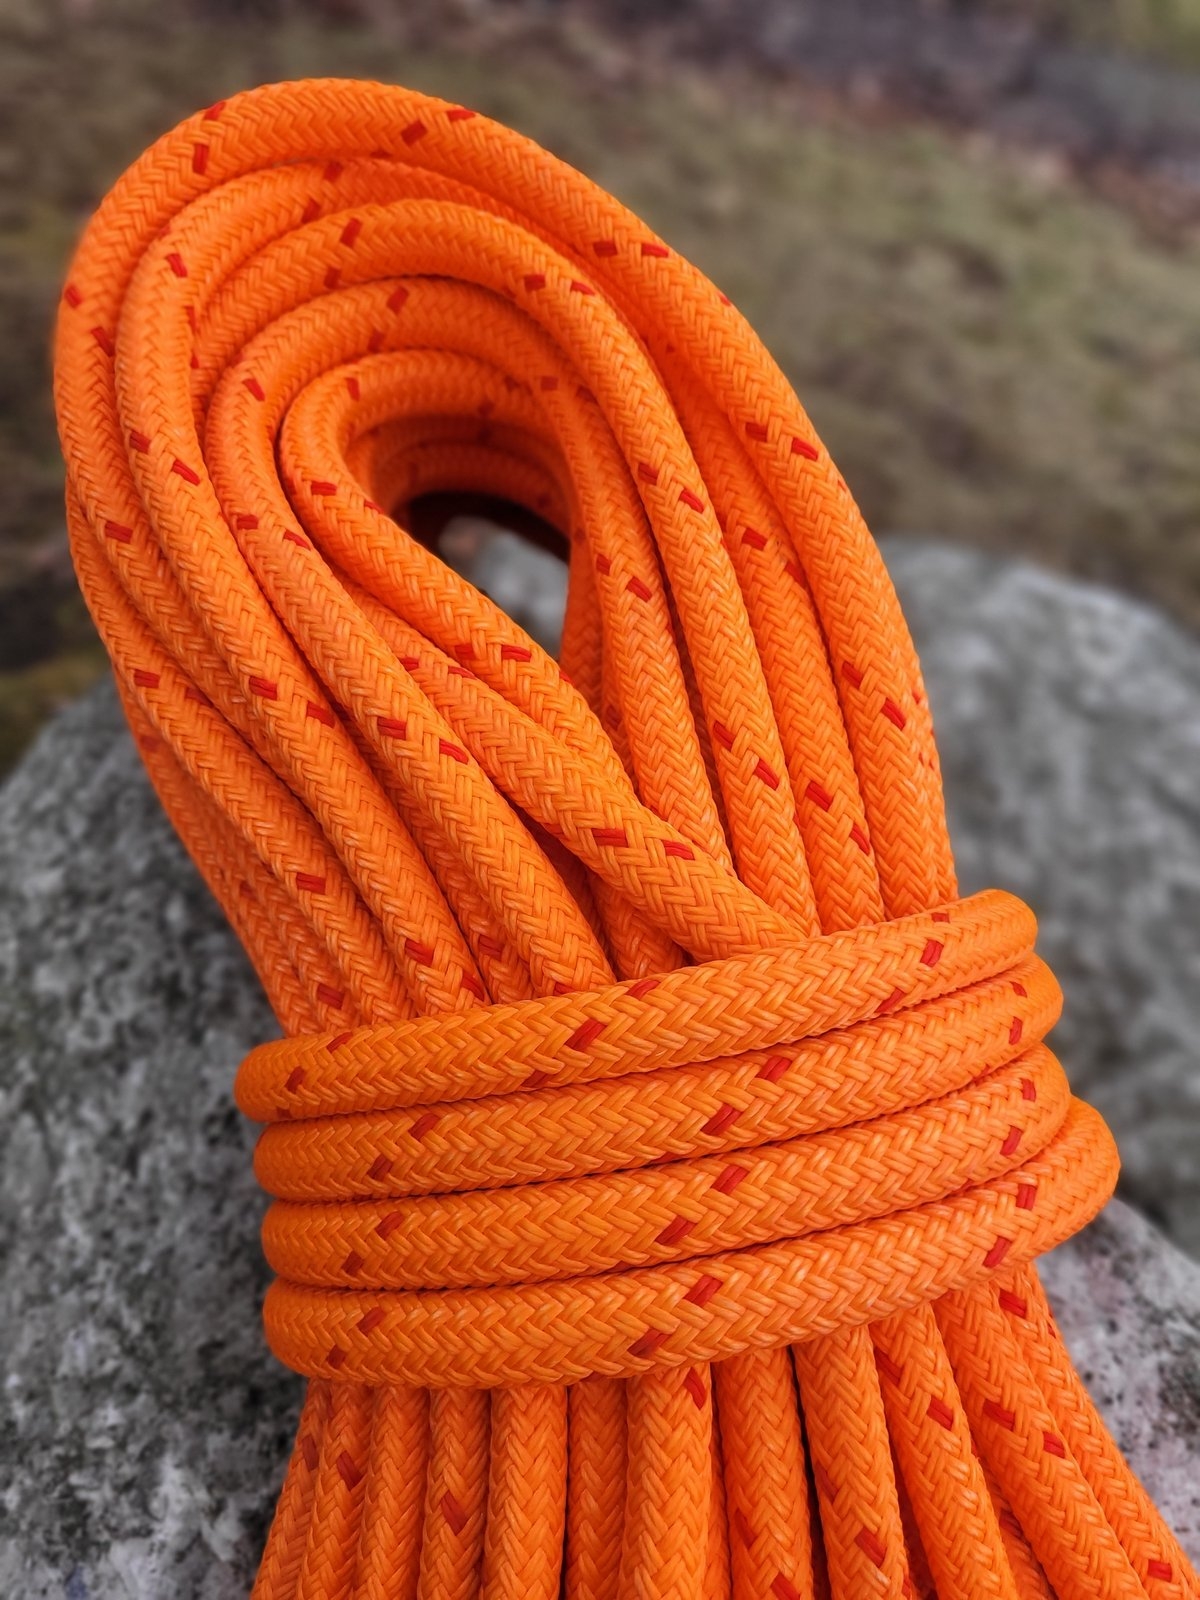 Yale Portland Braid ropes - Lowest prices, free shipping